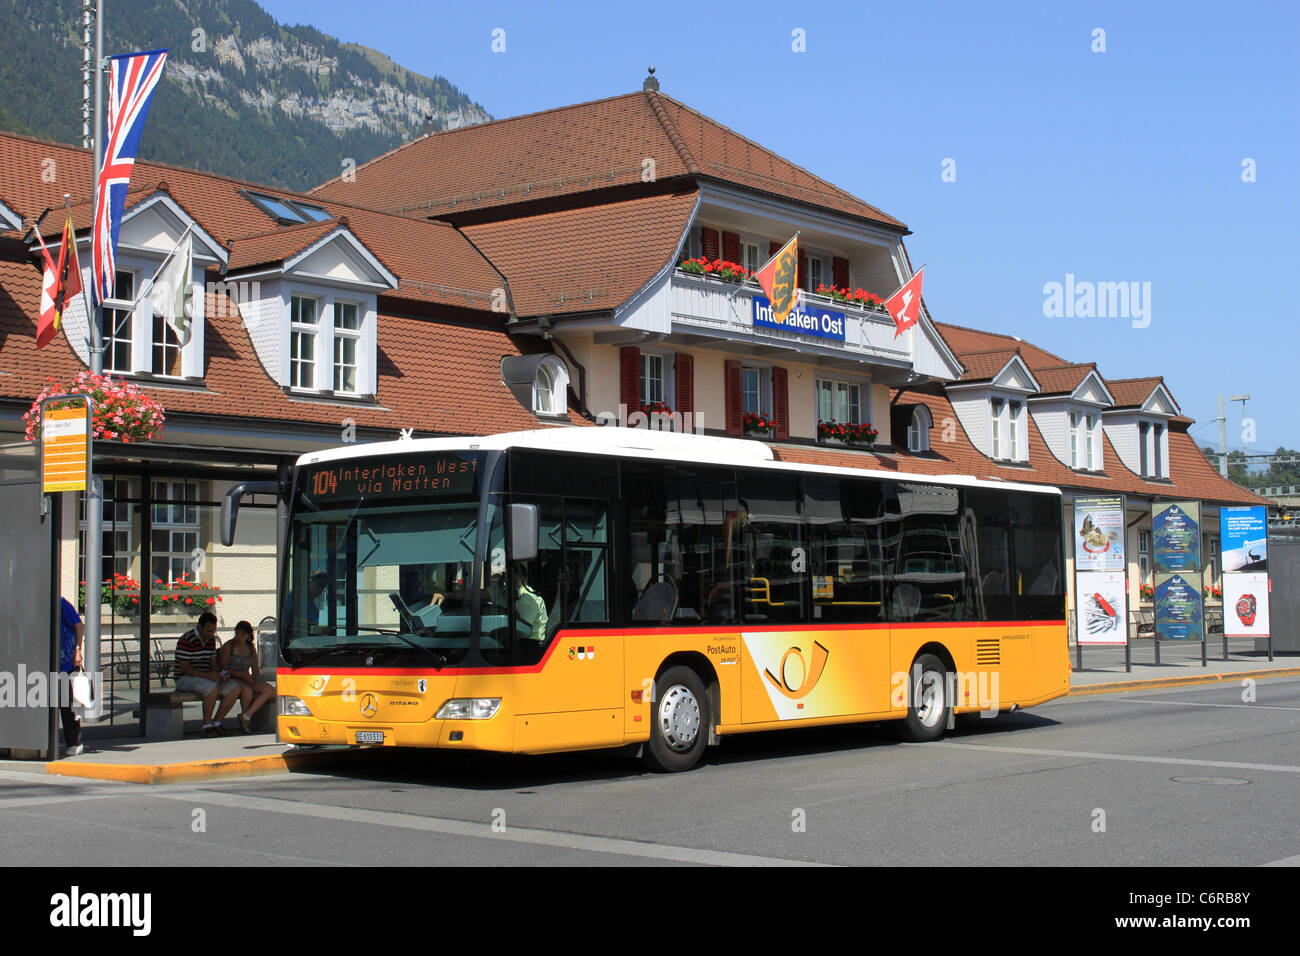 Interlaken West Railway Station High Resolution Stock Photography and  Images - Alamy